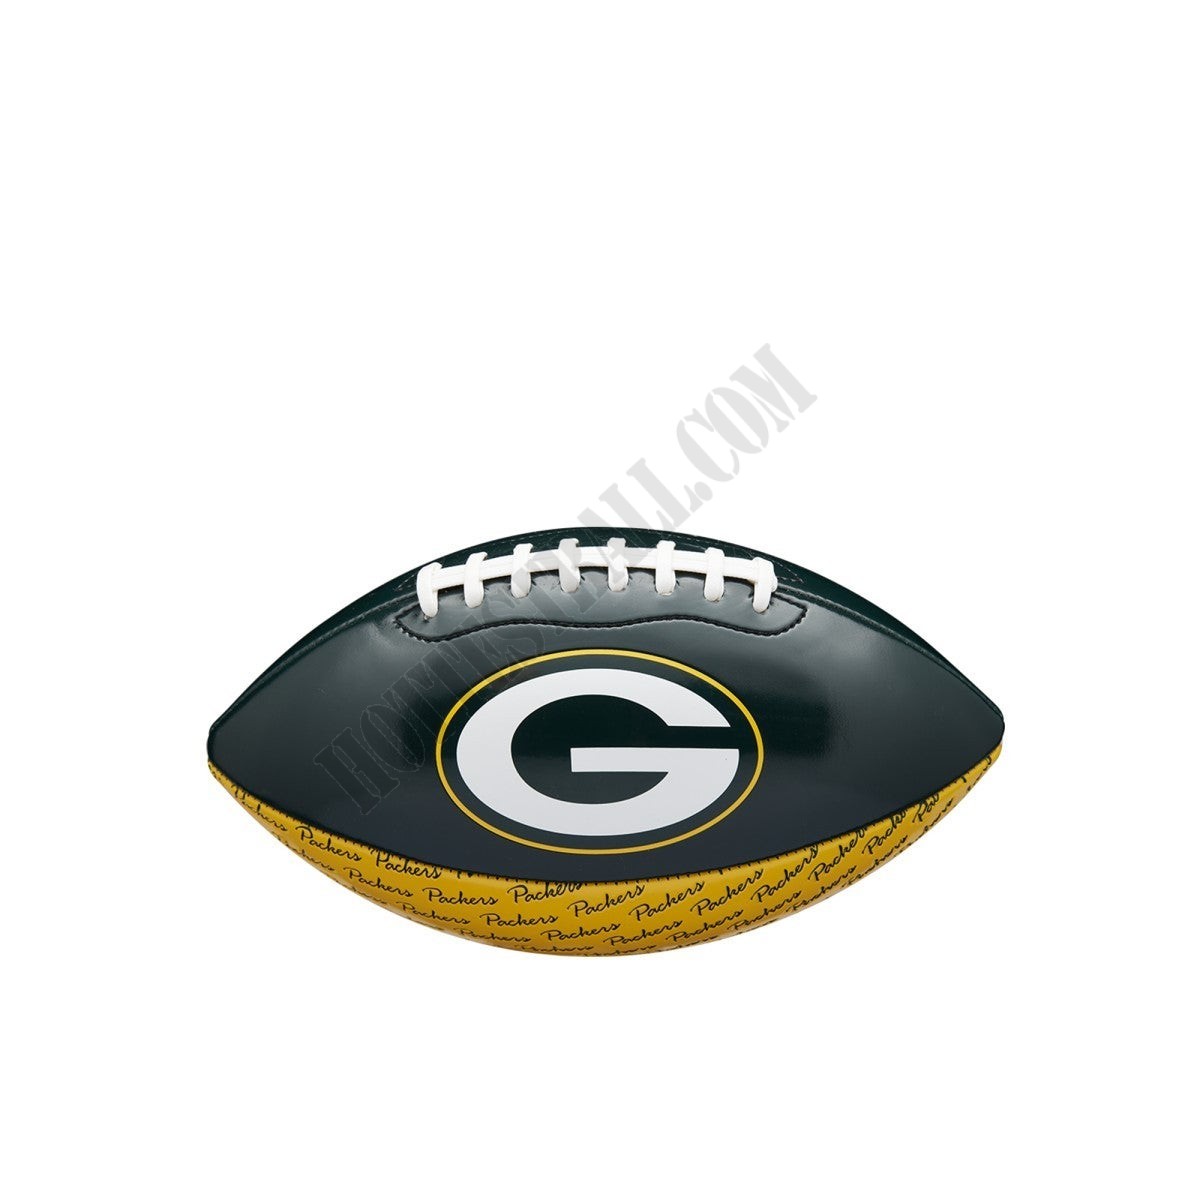 NFL City Pride Football - Green Bay Packers ● Wilson Promotions - NFL City Pride Football - Green Bay Packers ● Wilson Promotions